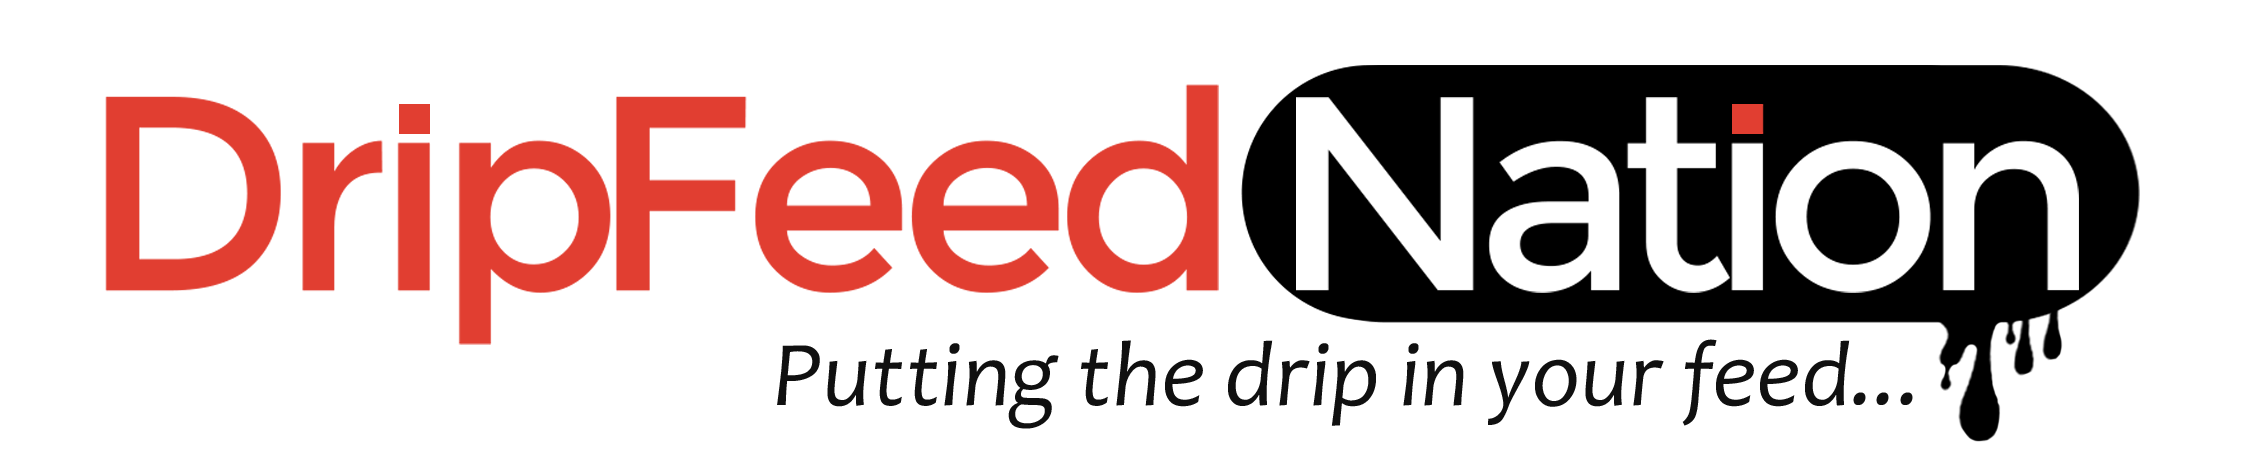 Dripfeed Nation Expands Services for SEO Agencies